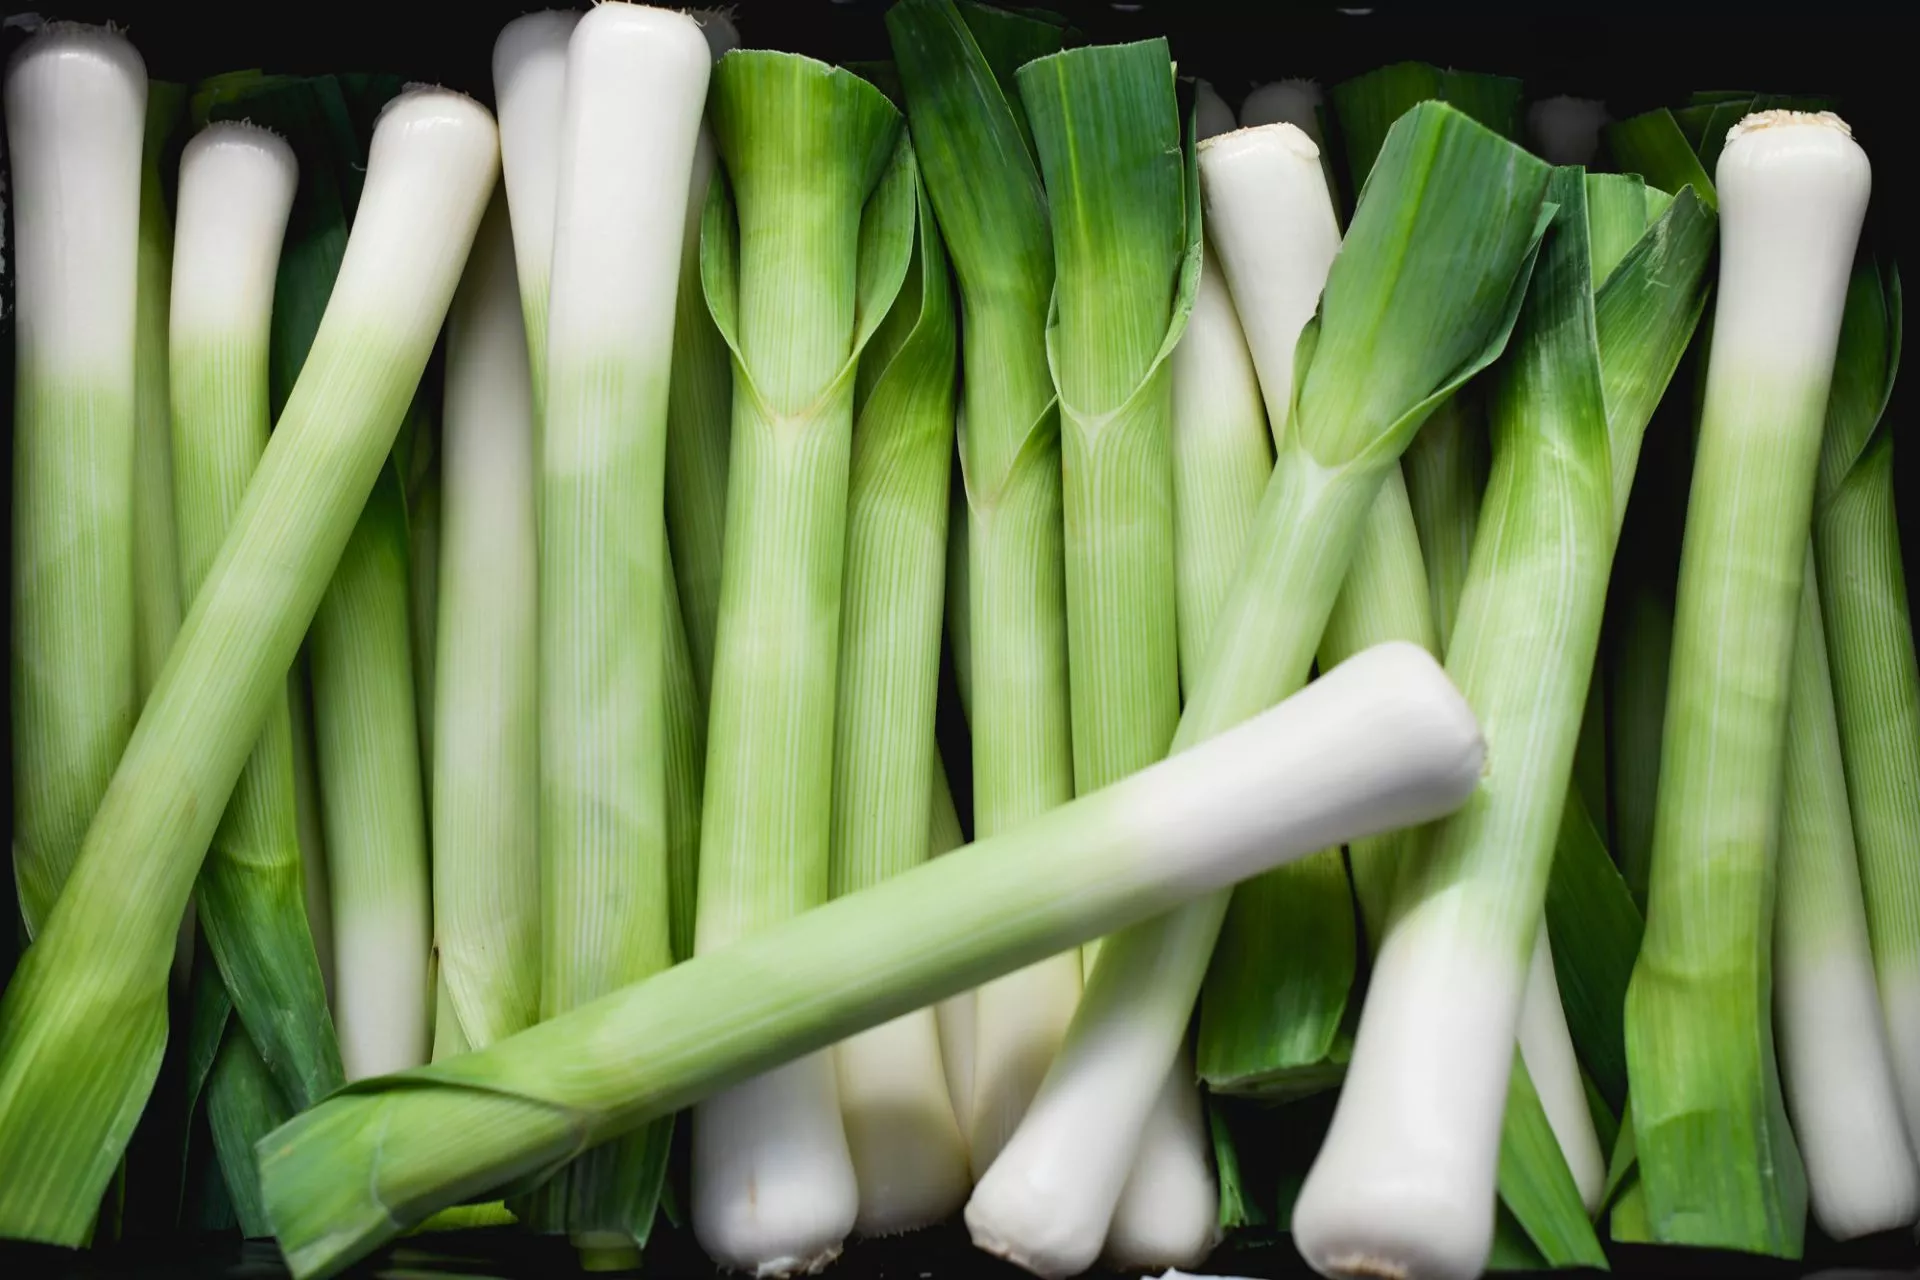 How to Cook Leeks